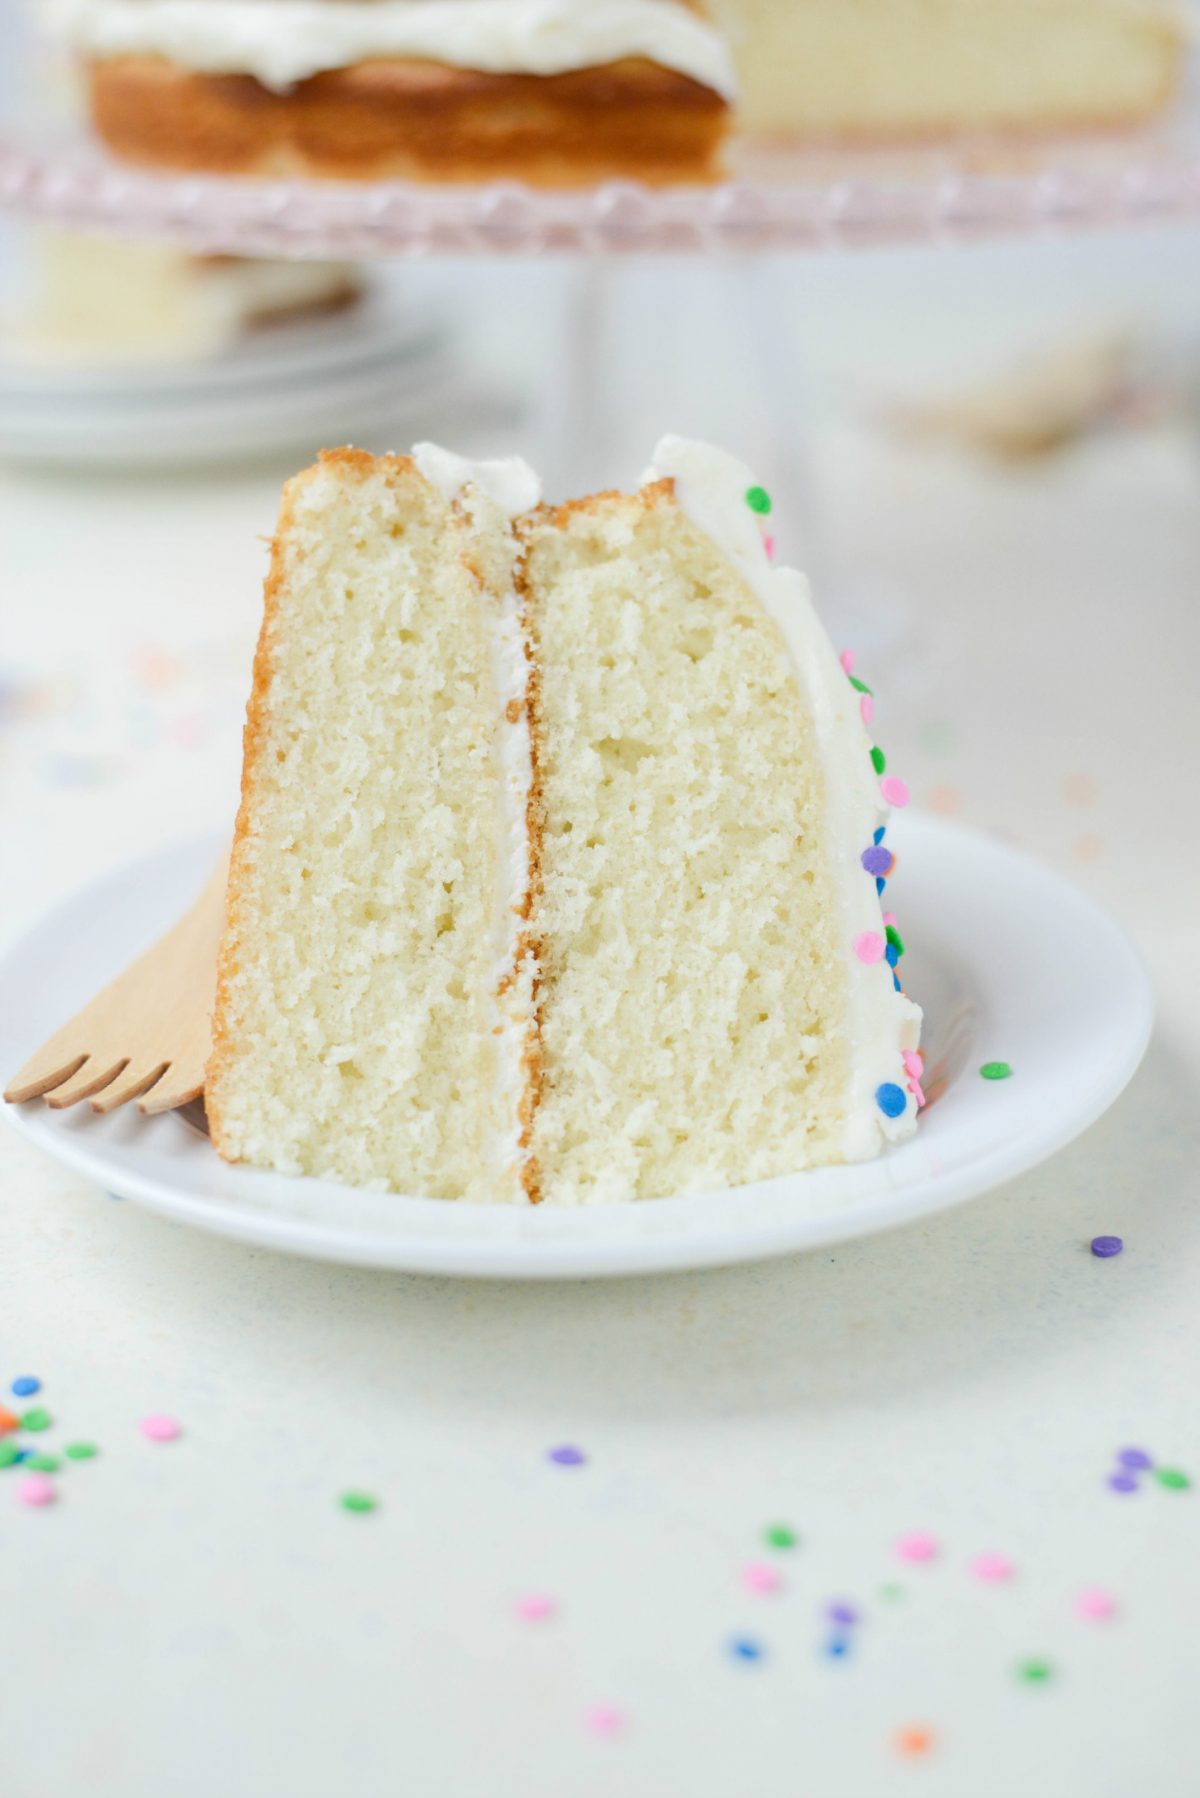 Vanilla Cake Made From Scratch | Life Made Simple